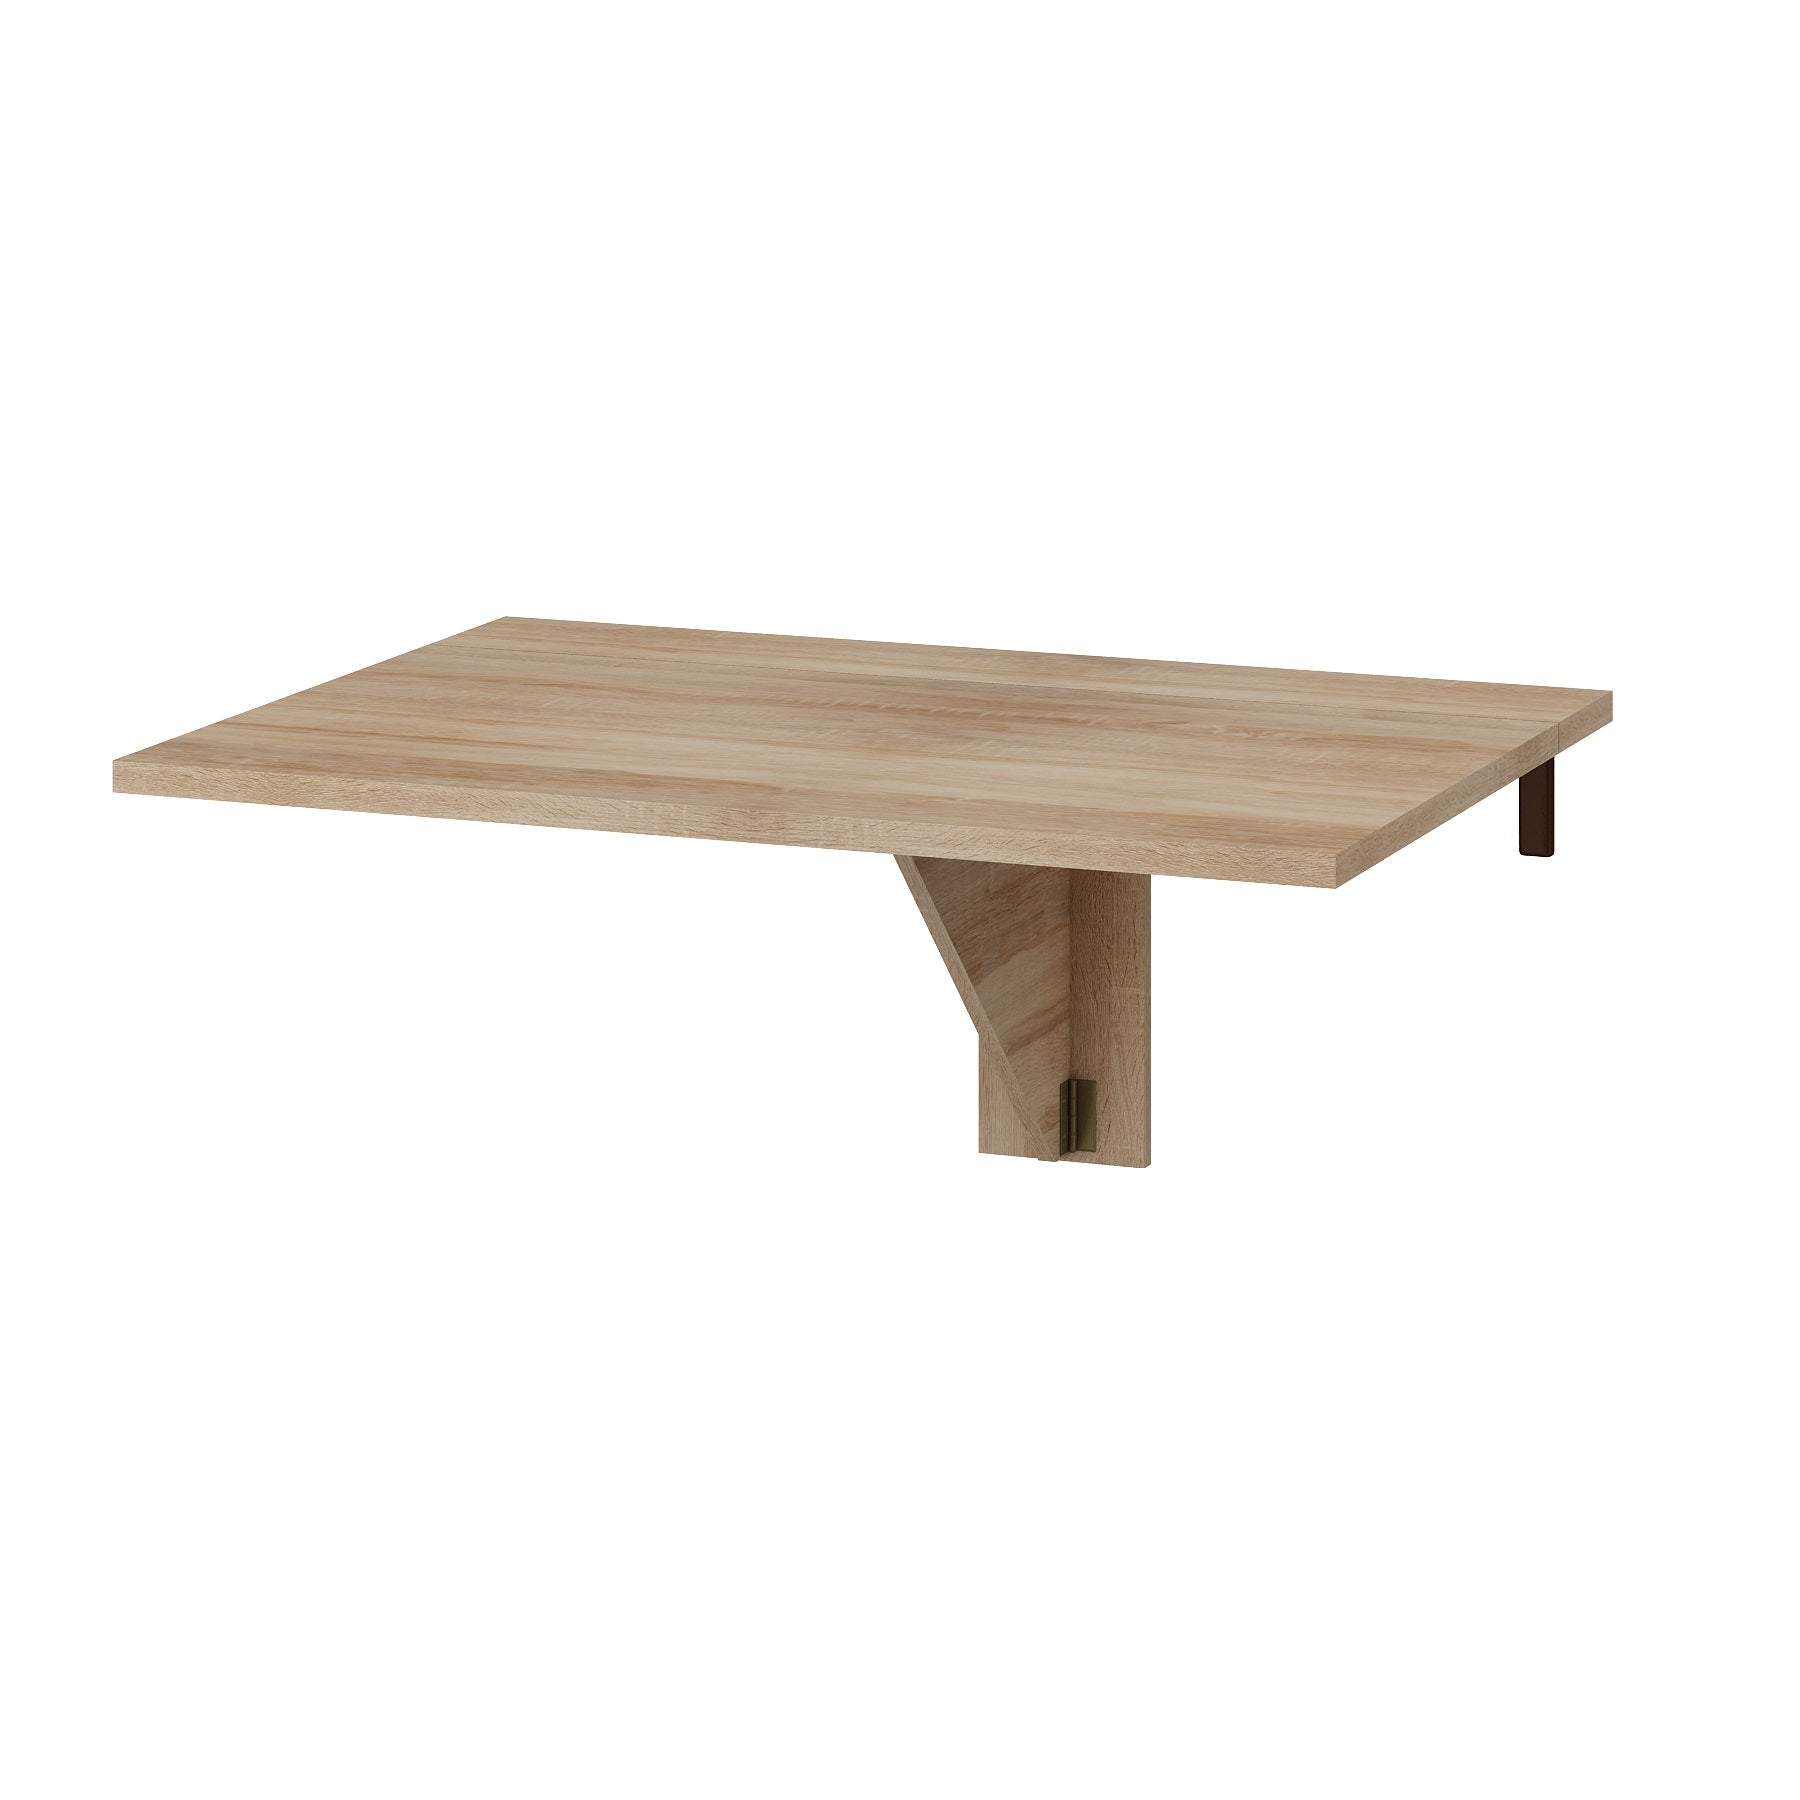 Expert D Wall-Mounted Drop Leaf Dining Table - Furniture.Agency